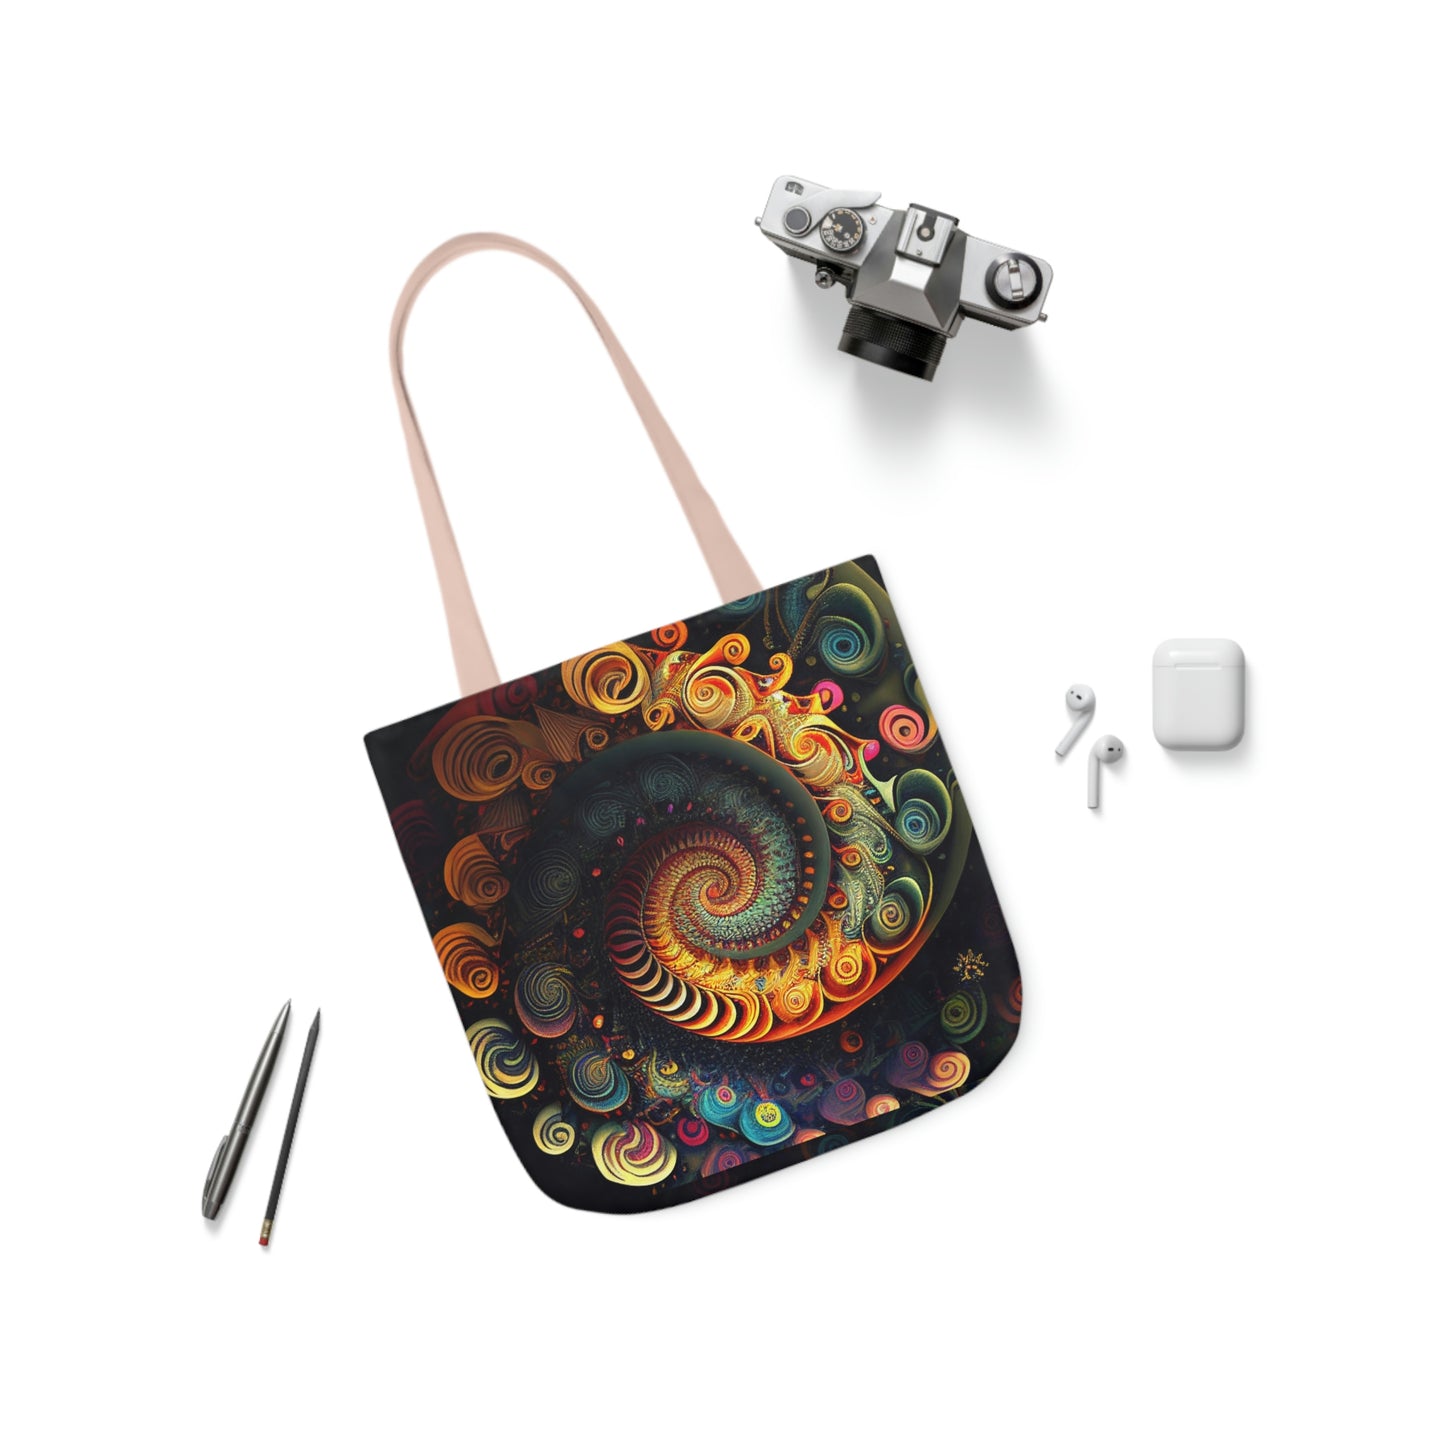 Psychedelic Swirls Tote Bag